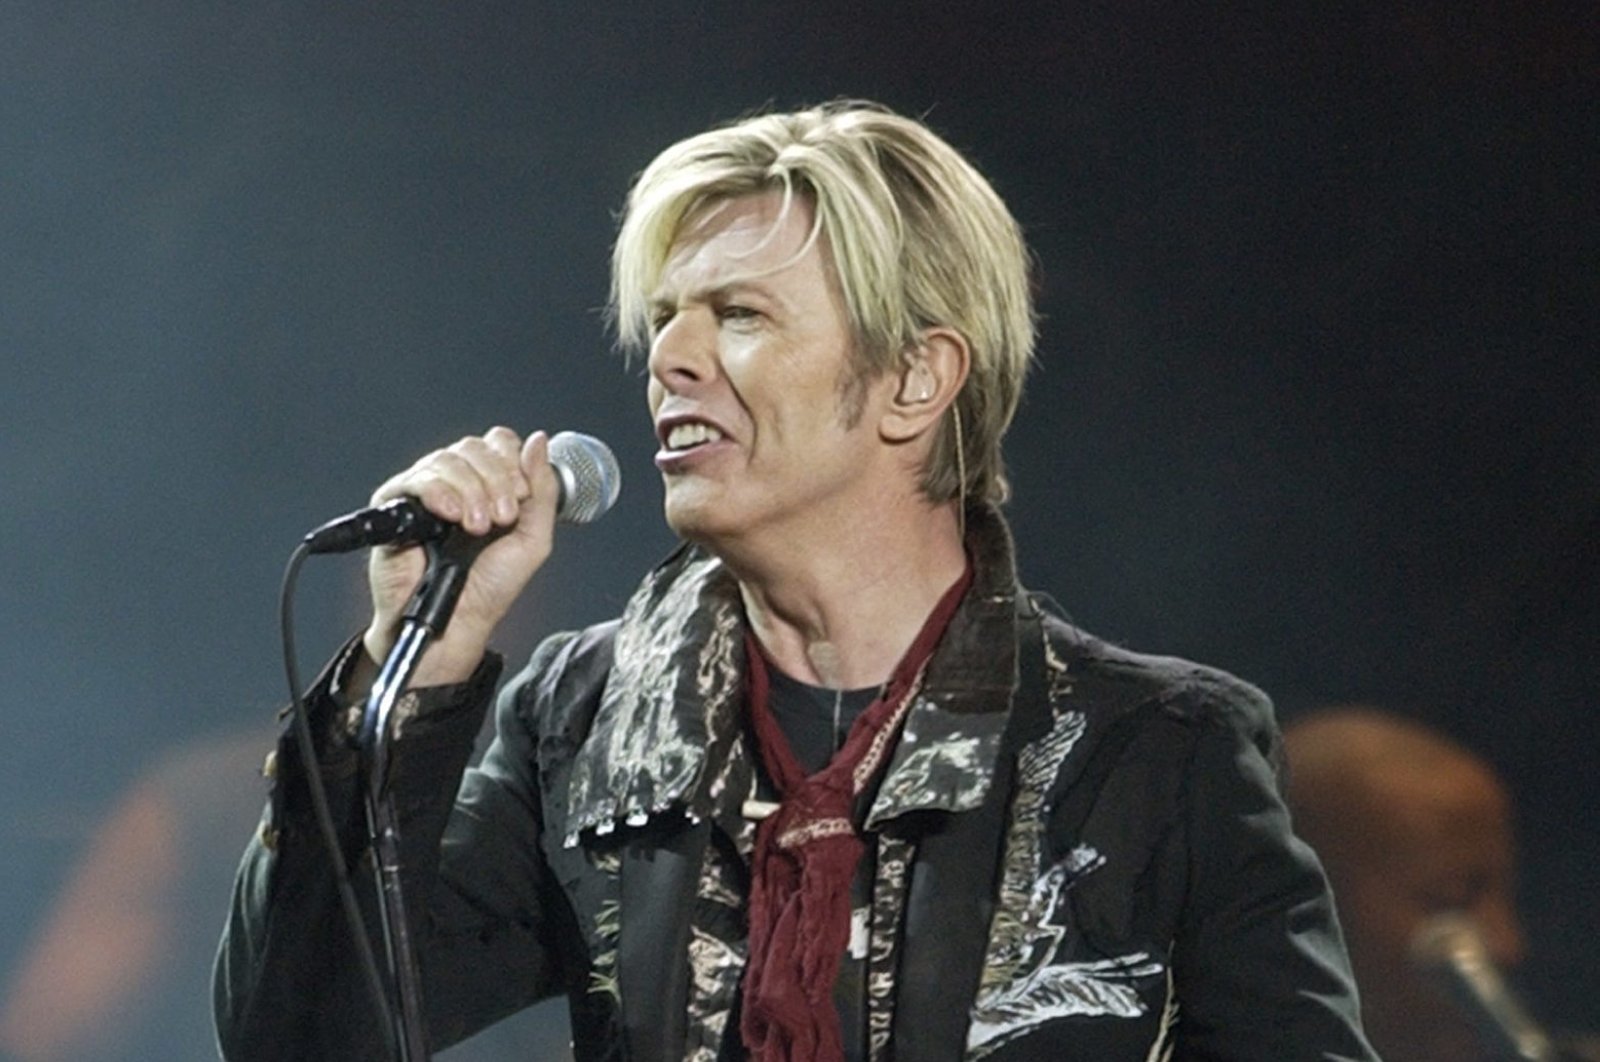 David Bowie launches the U.S. leg of his worldwide tour called "A Reality Tour," at Madison Square Garden in New York City, New York, U.S., Dec. 15, 2003. (AP Photo)